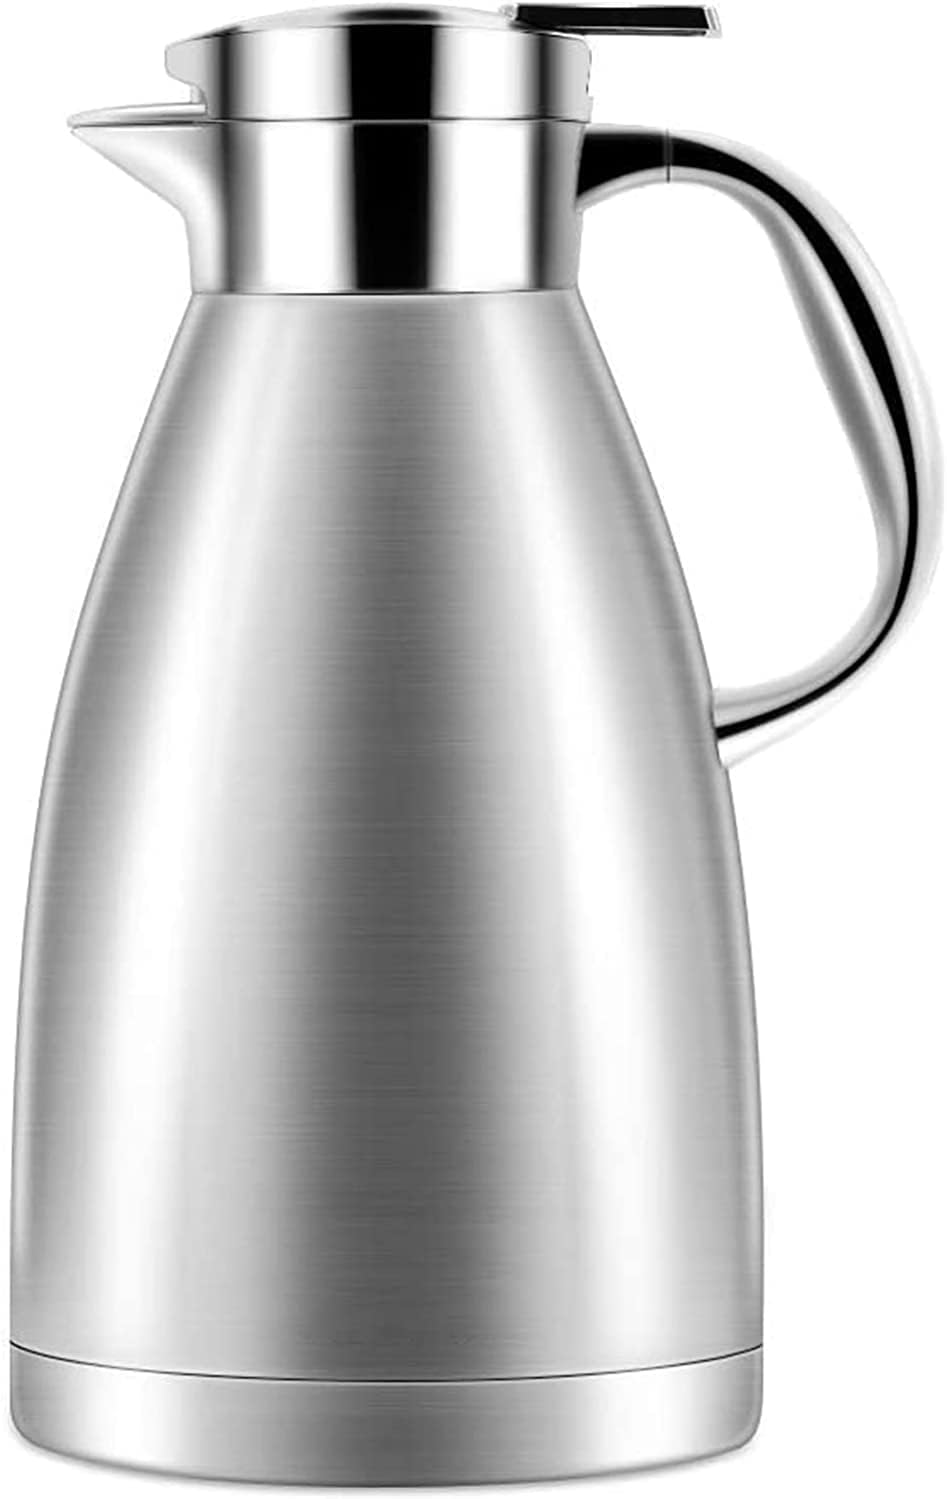 1.8 Litre 18/10 Food-grade Stainless Steel Thermal Carafe/Double Walled Vacuum Insulated Coffee Pot